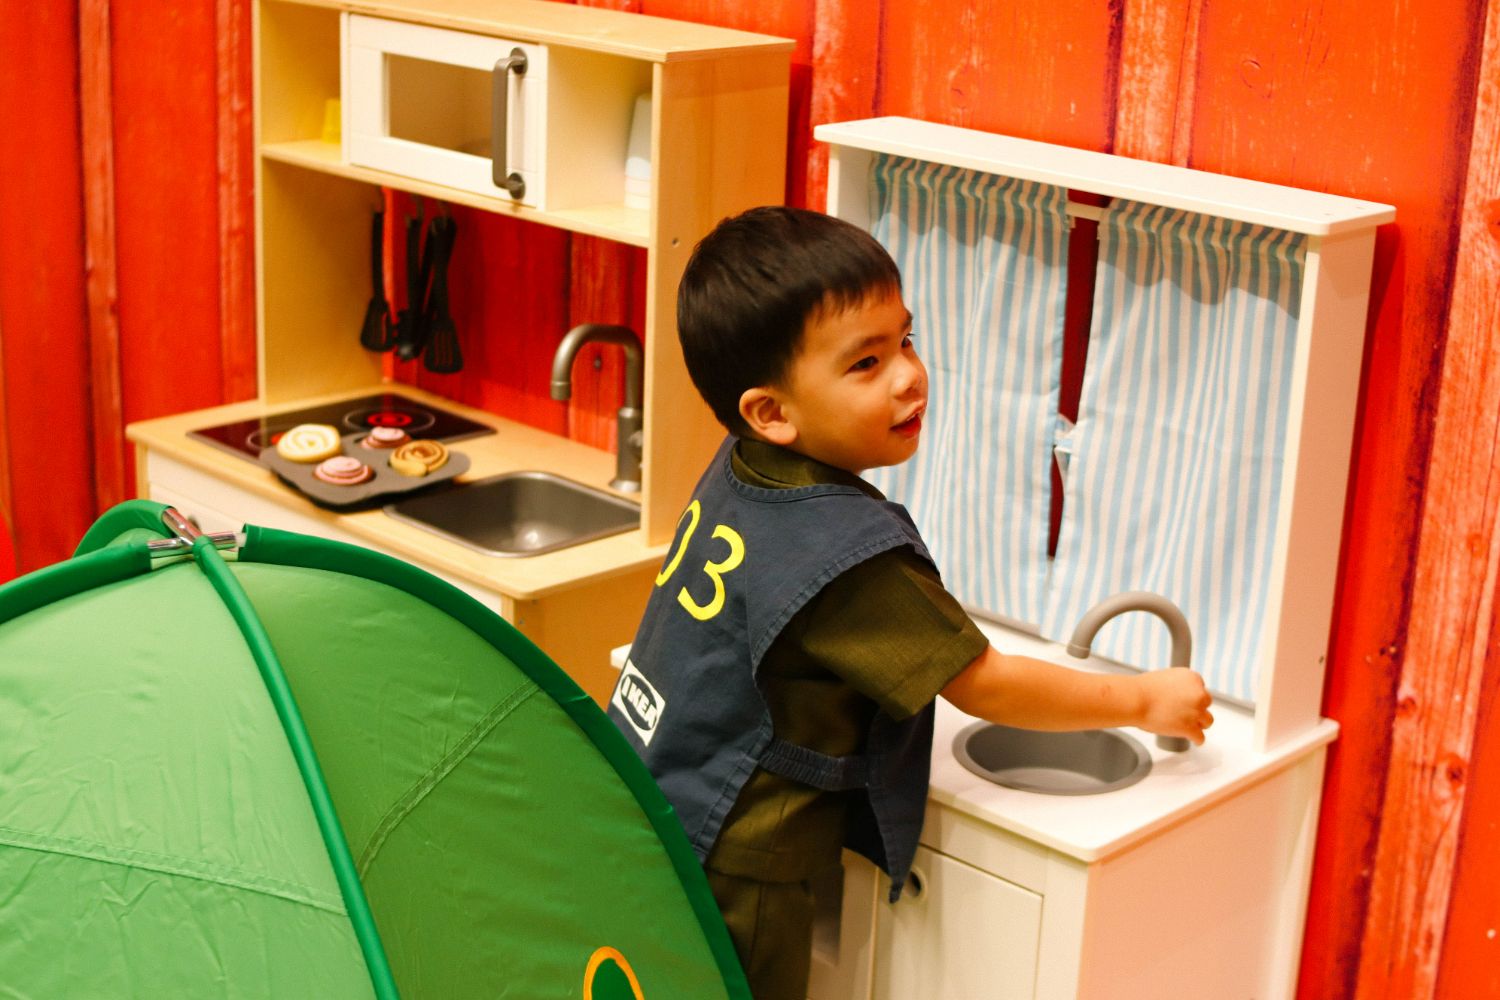 IKEA Pasay Opens Småland, An Indoor Play Area for Kids